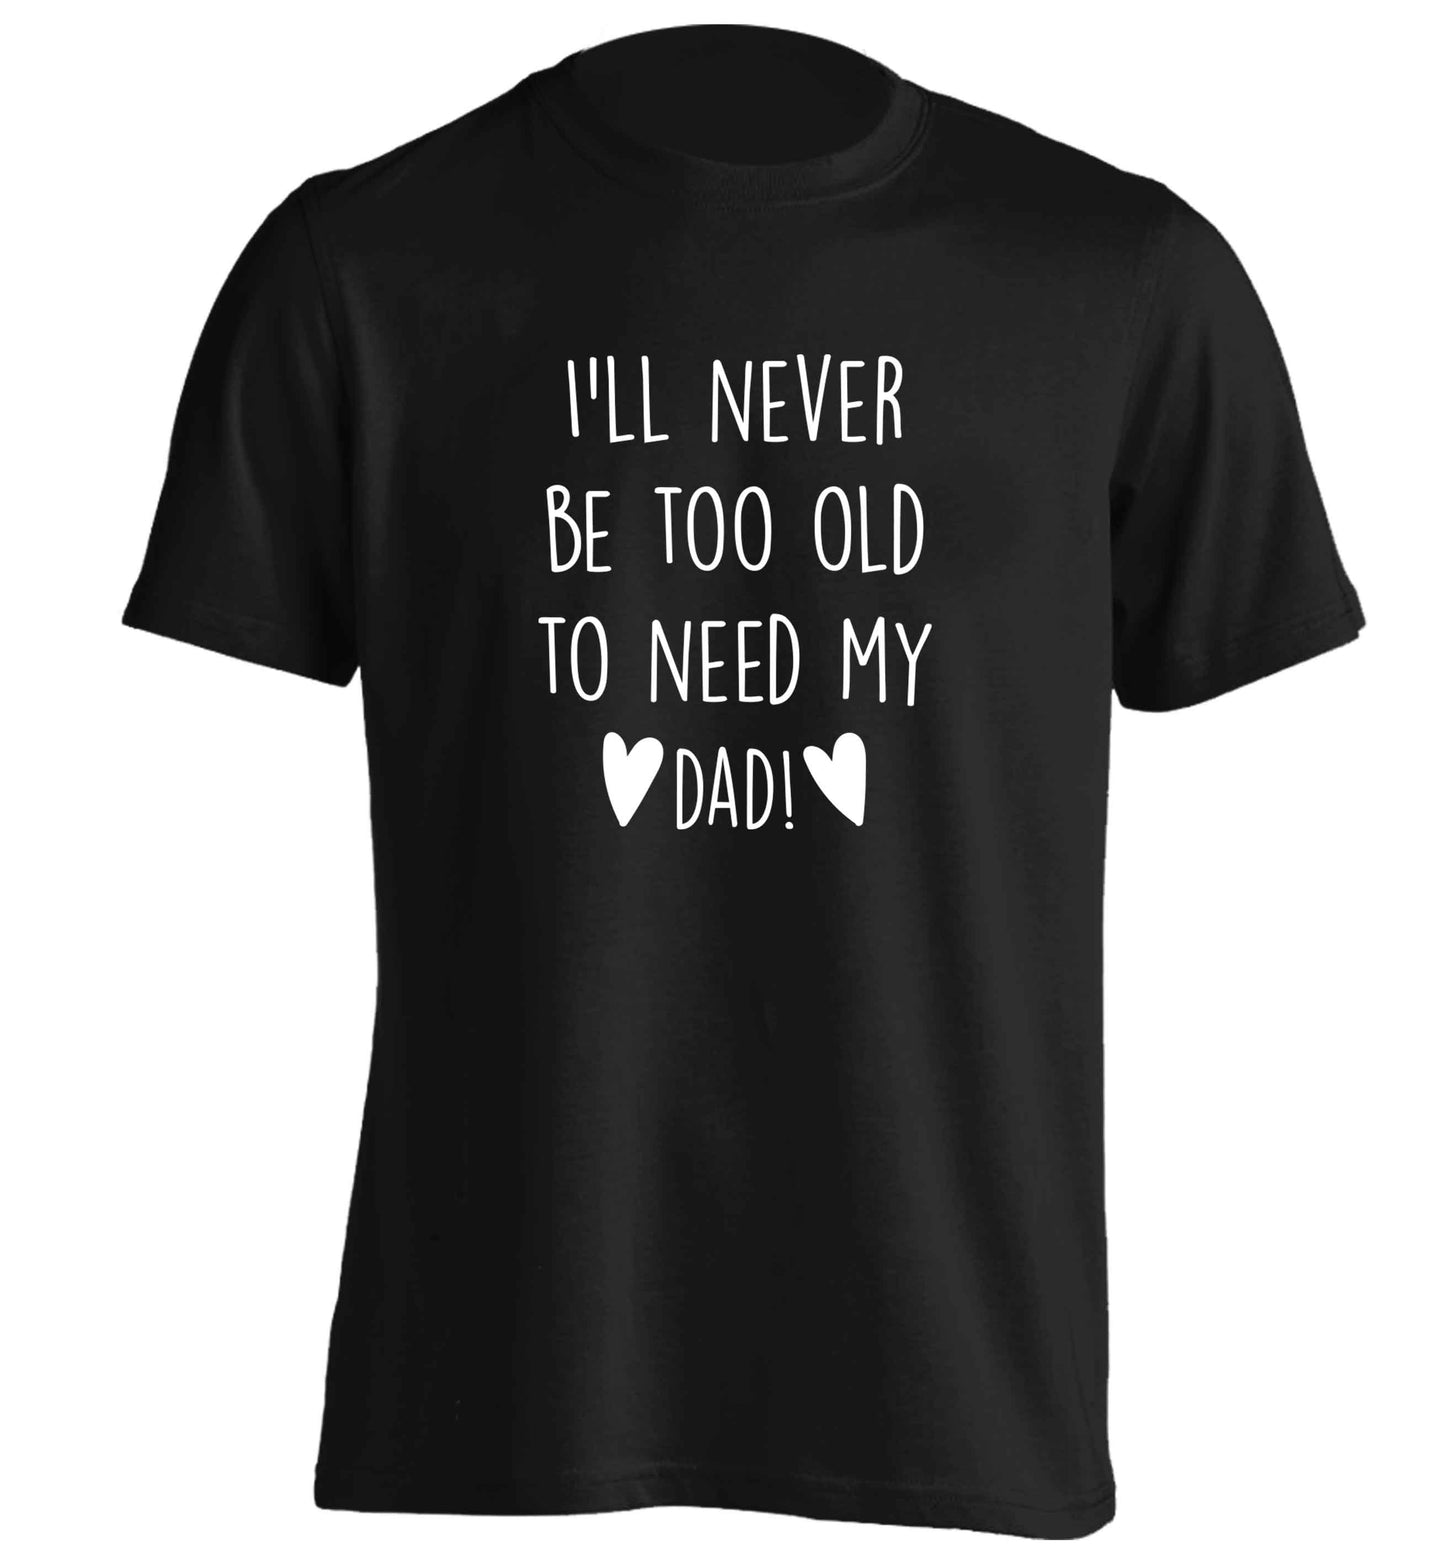 I'll never be too old to need my dad adults unisex black Tshirt 2XL